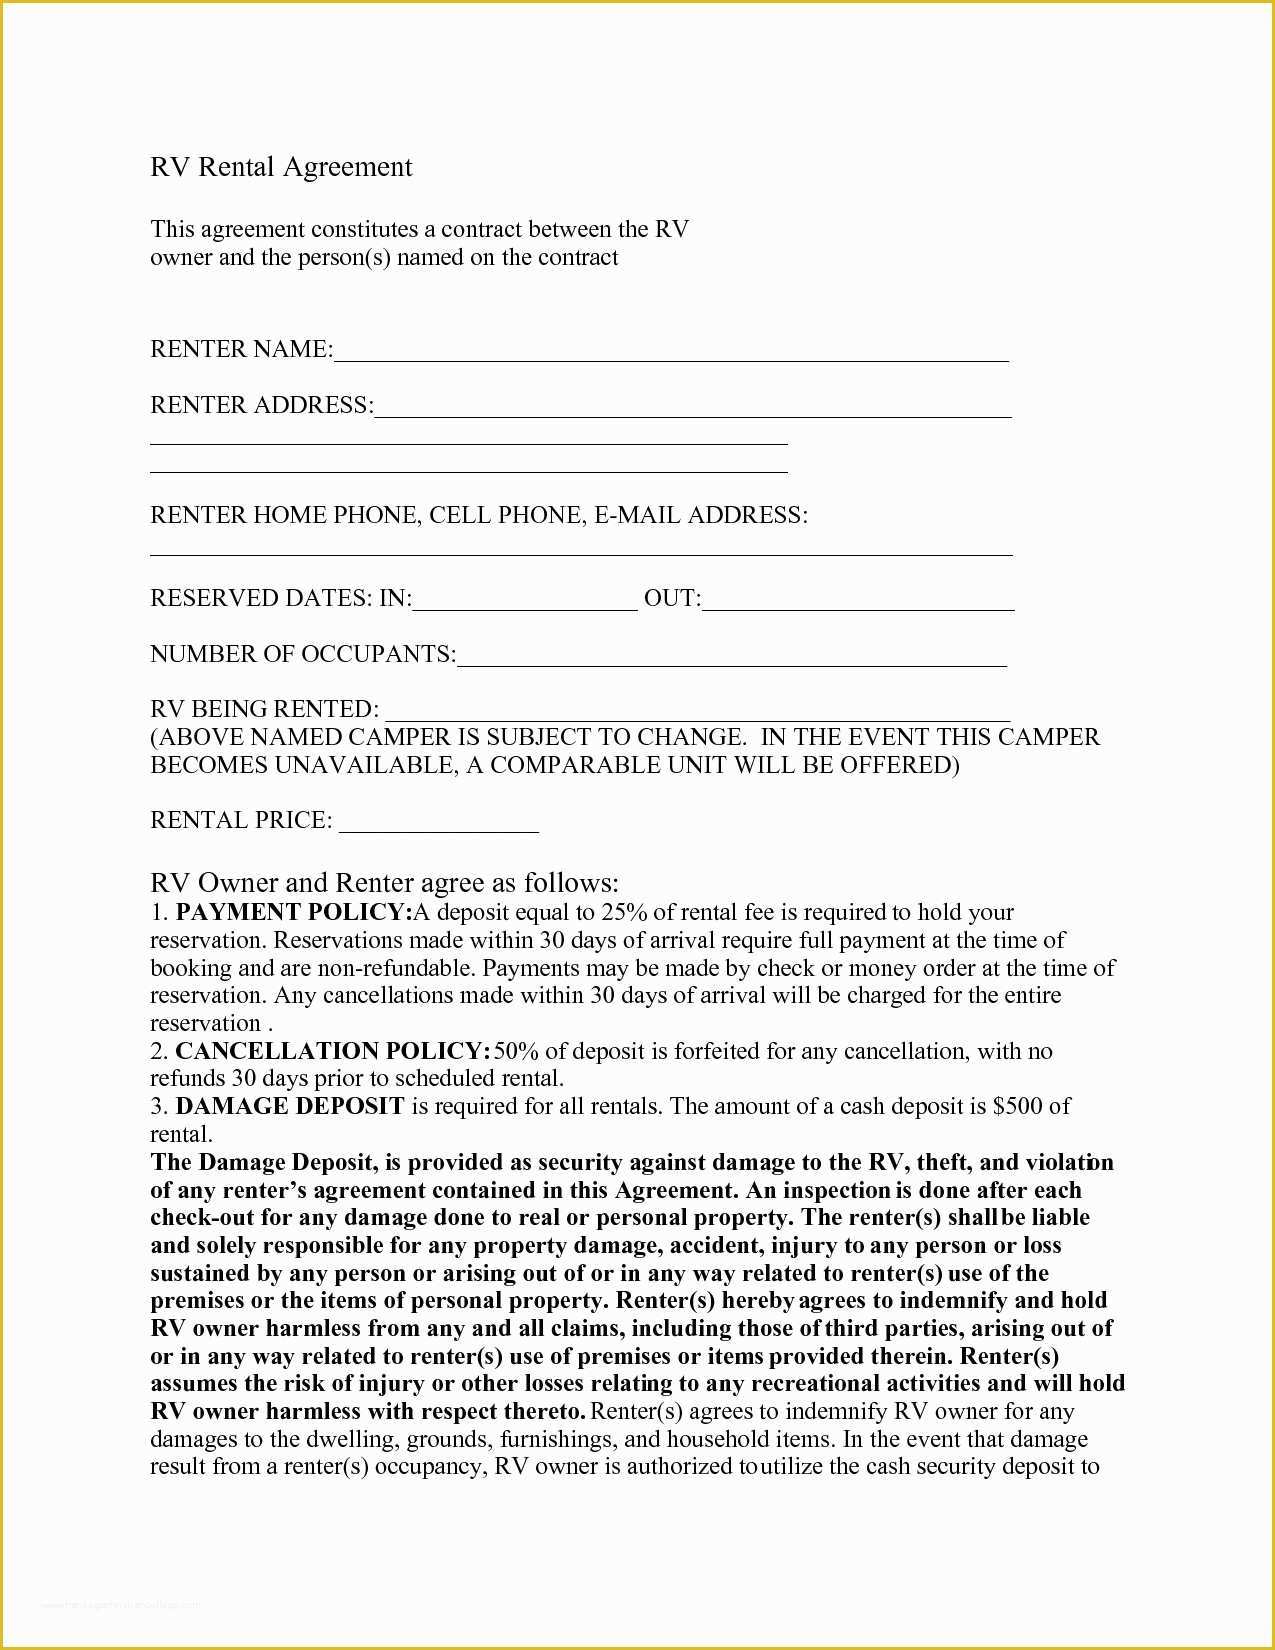 Trailer Lease Agreement Template Free Of Free Rv Purchase Agreement form Good Elegant Collection